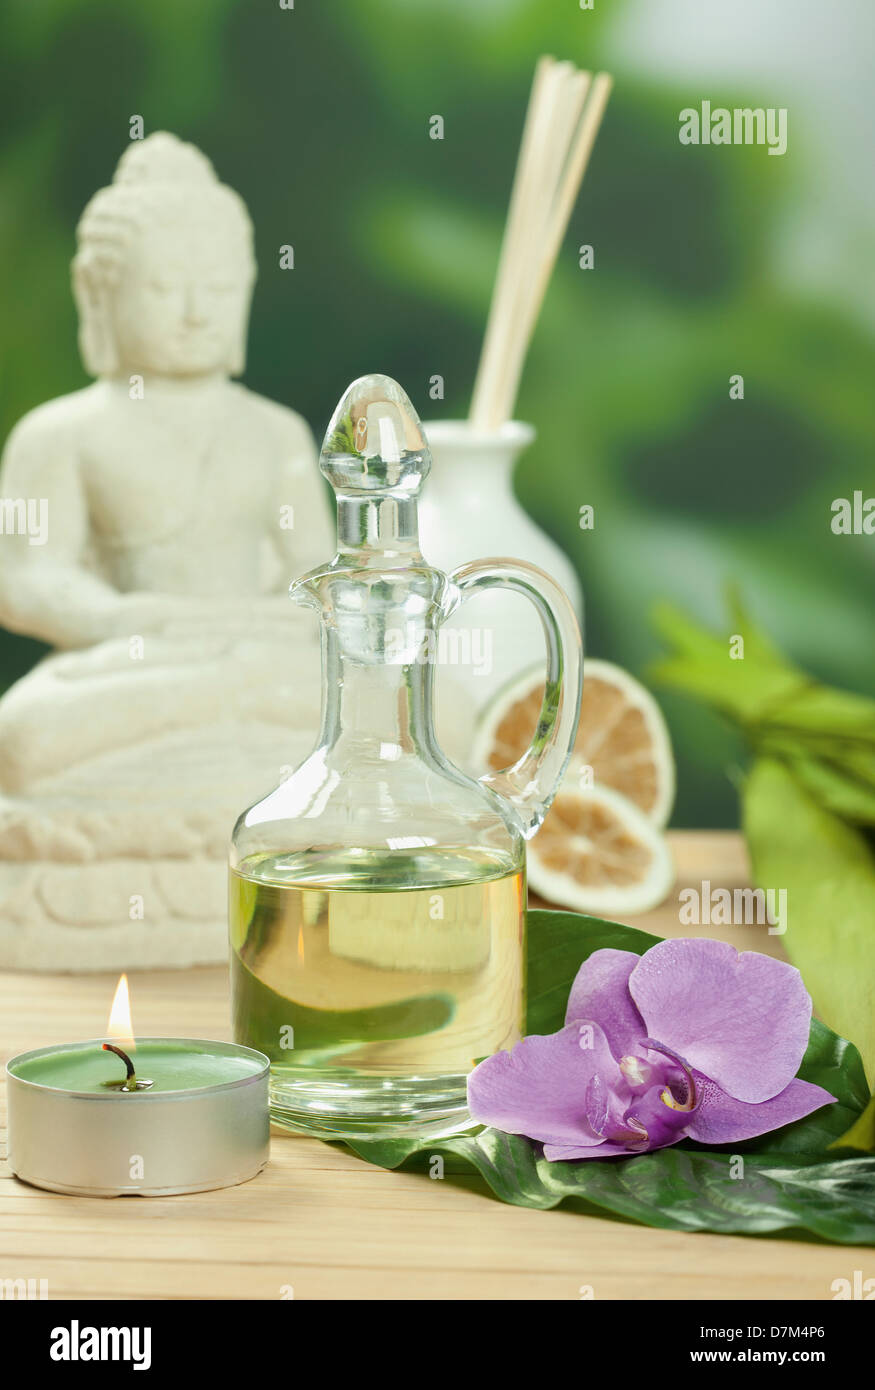 Arrangement of spa products with buddha statue Stock Photo